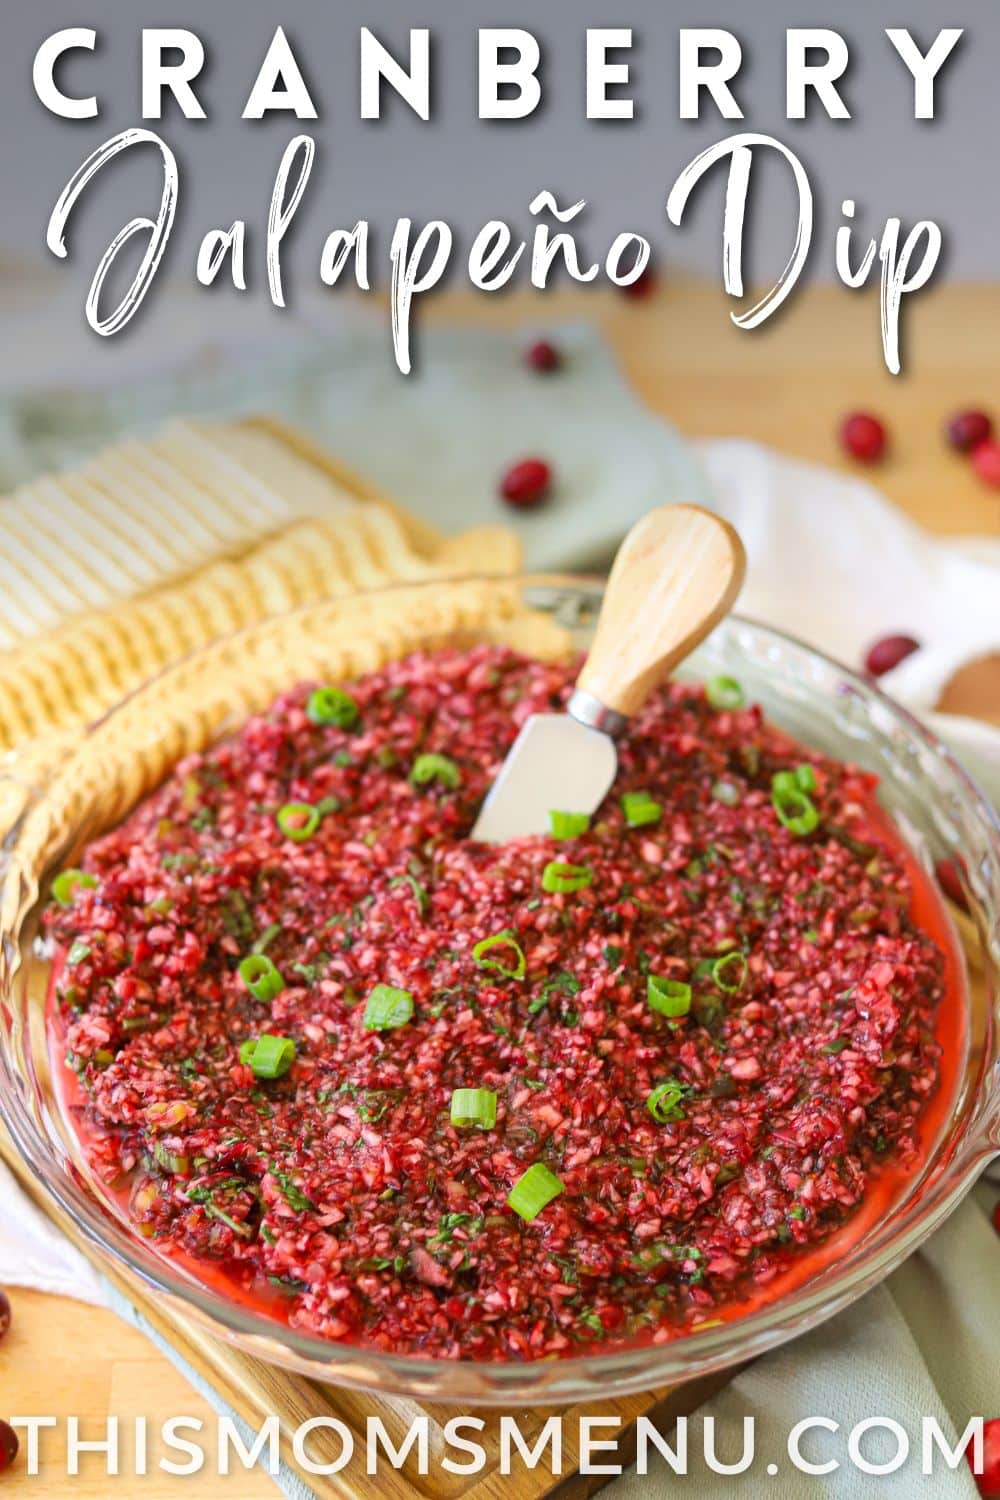 a cranberry dip over cream cheese with a text overlay